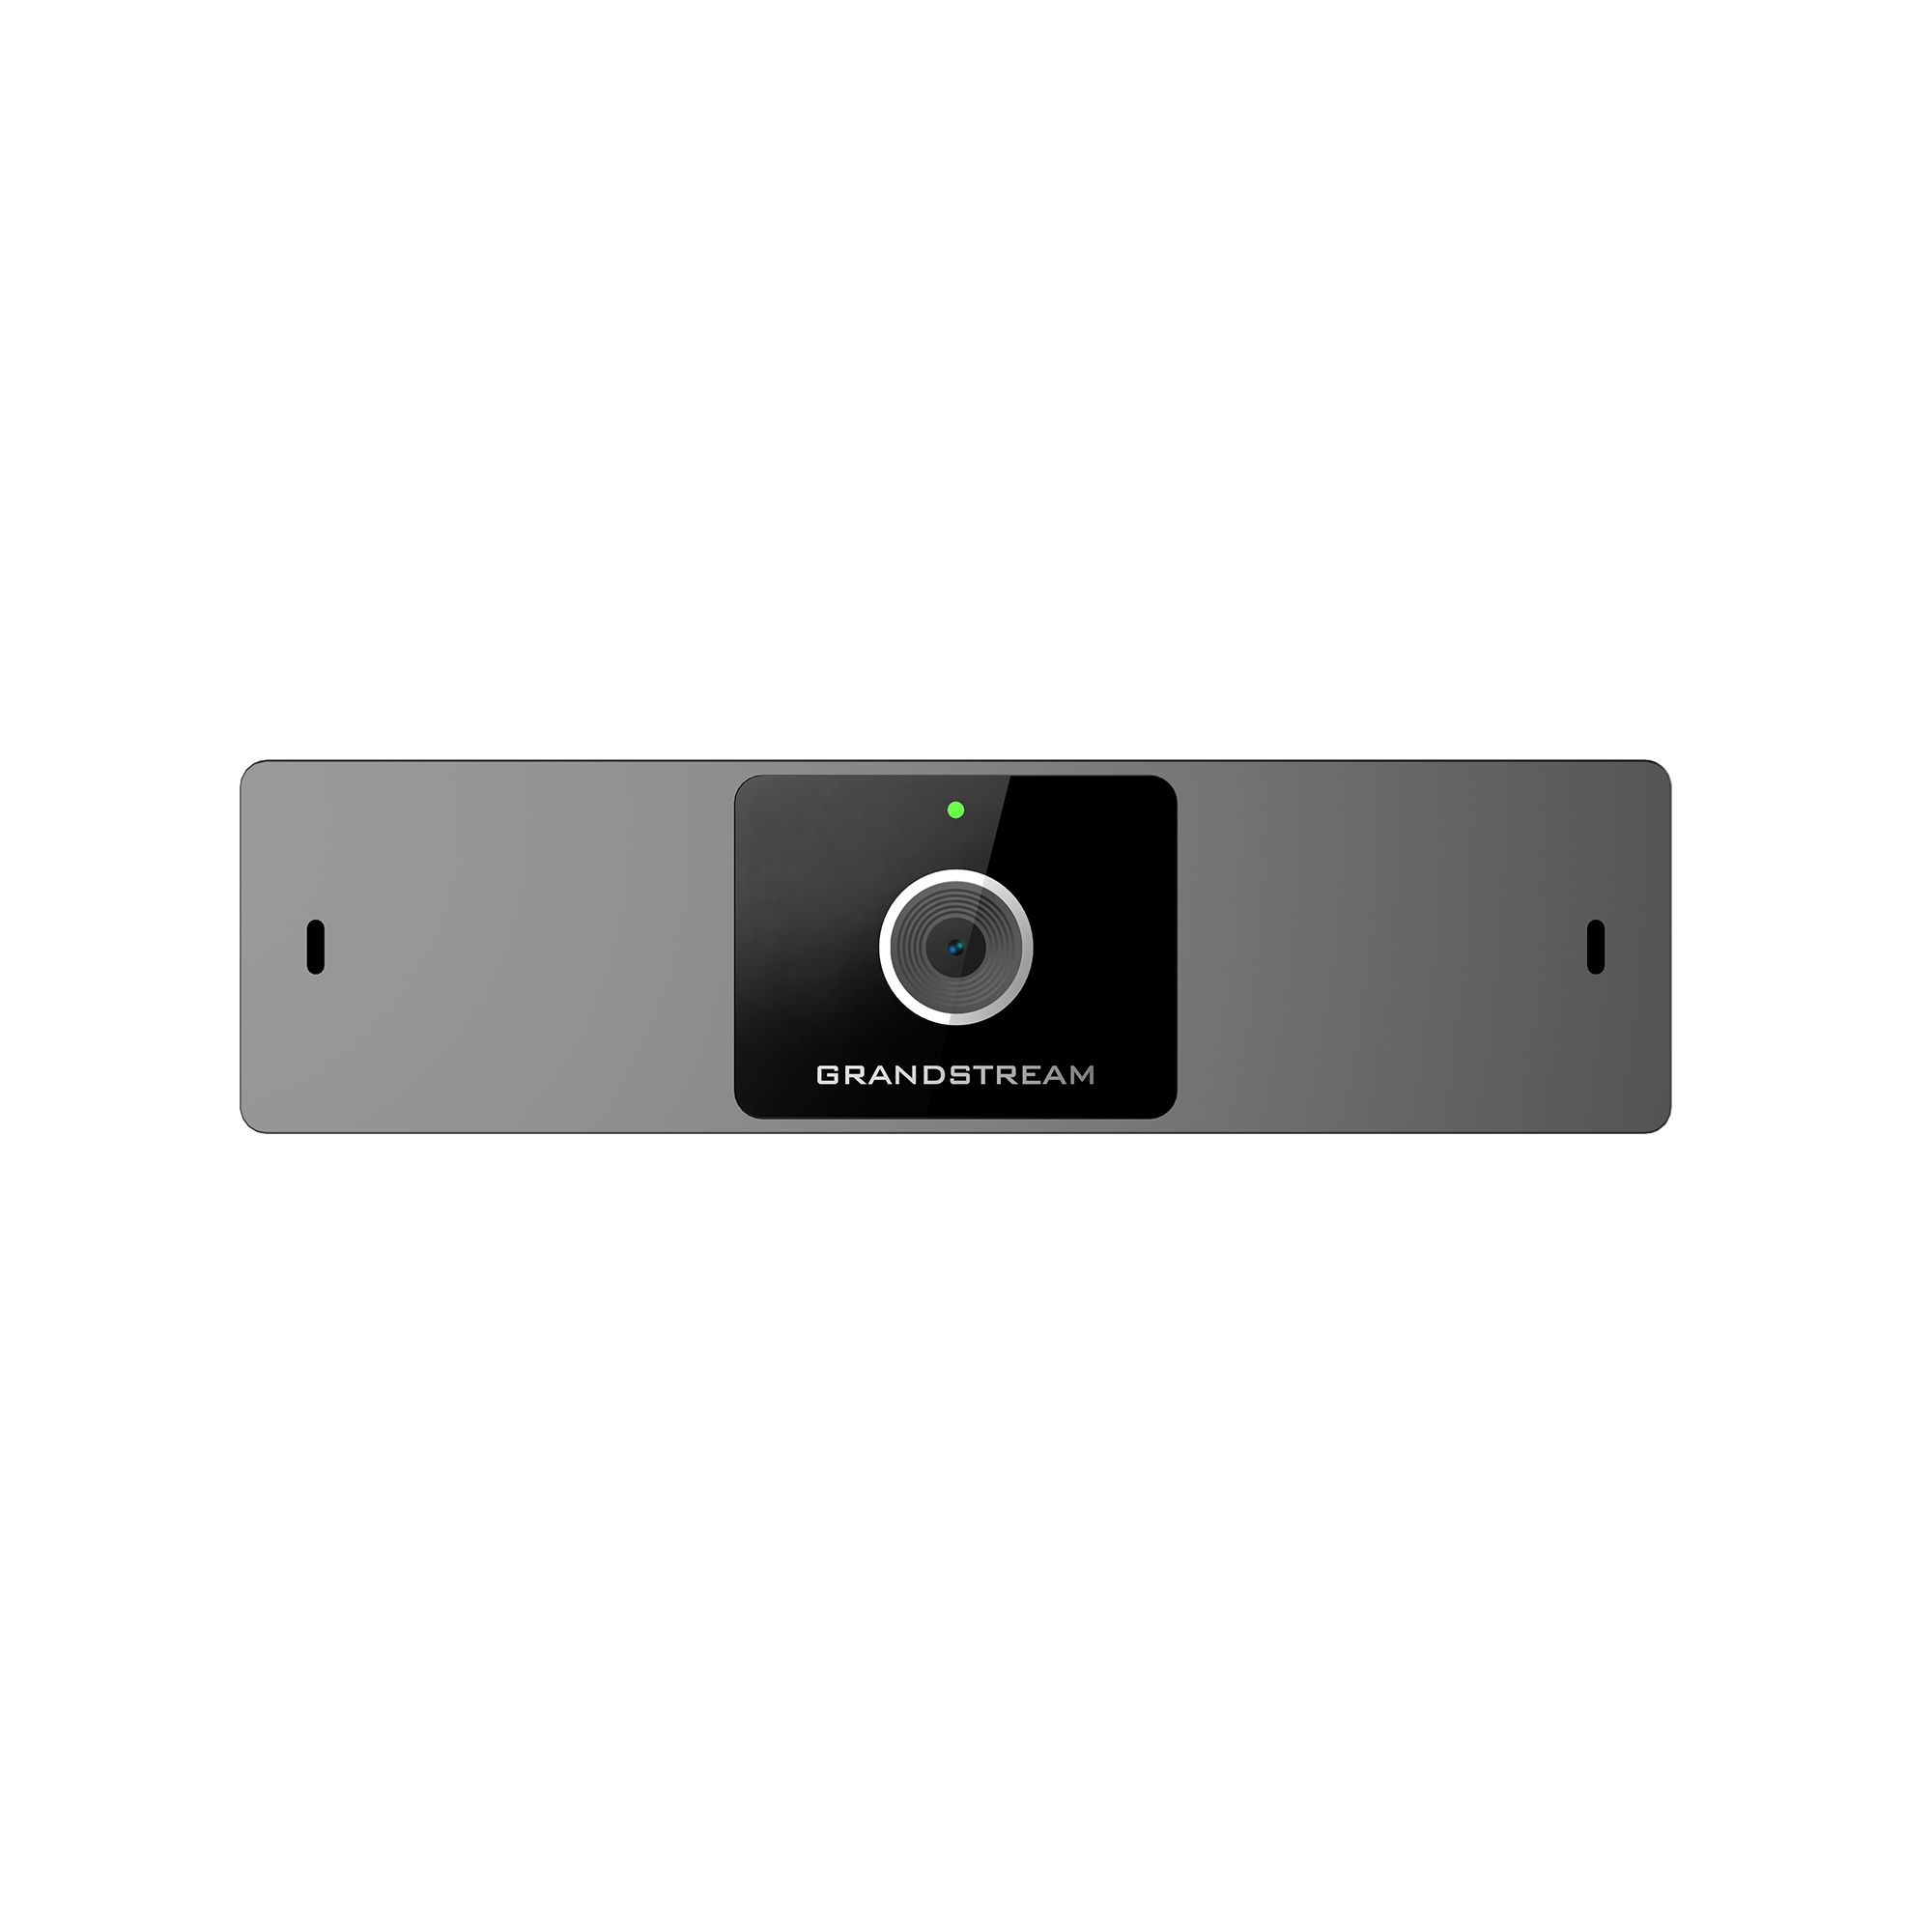 Grandstream GVC3212 HD Video Conferencing Endpoint front